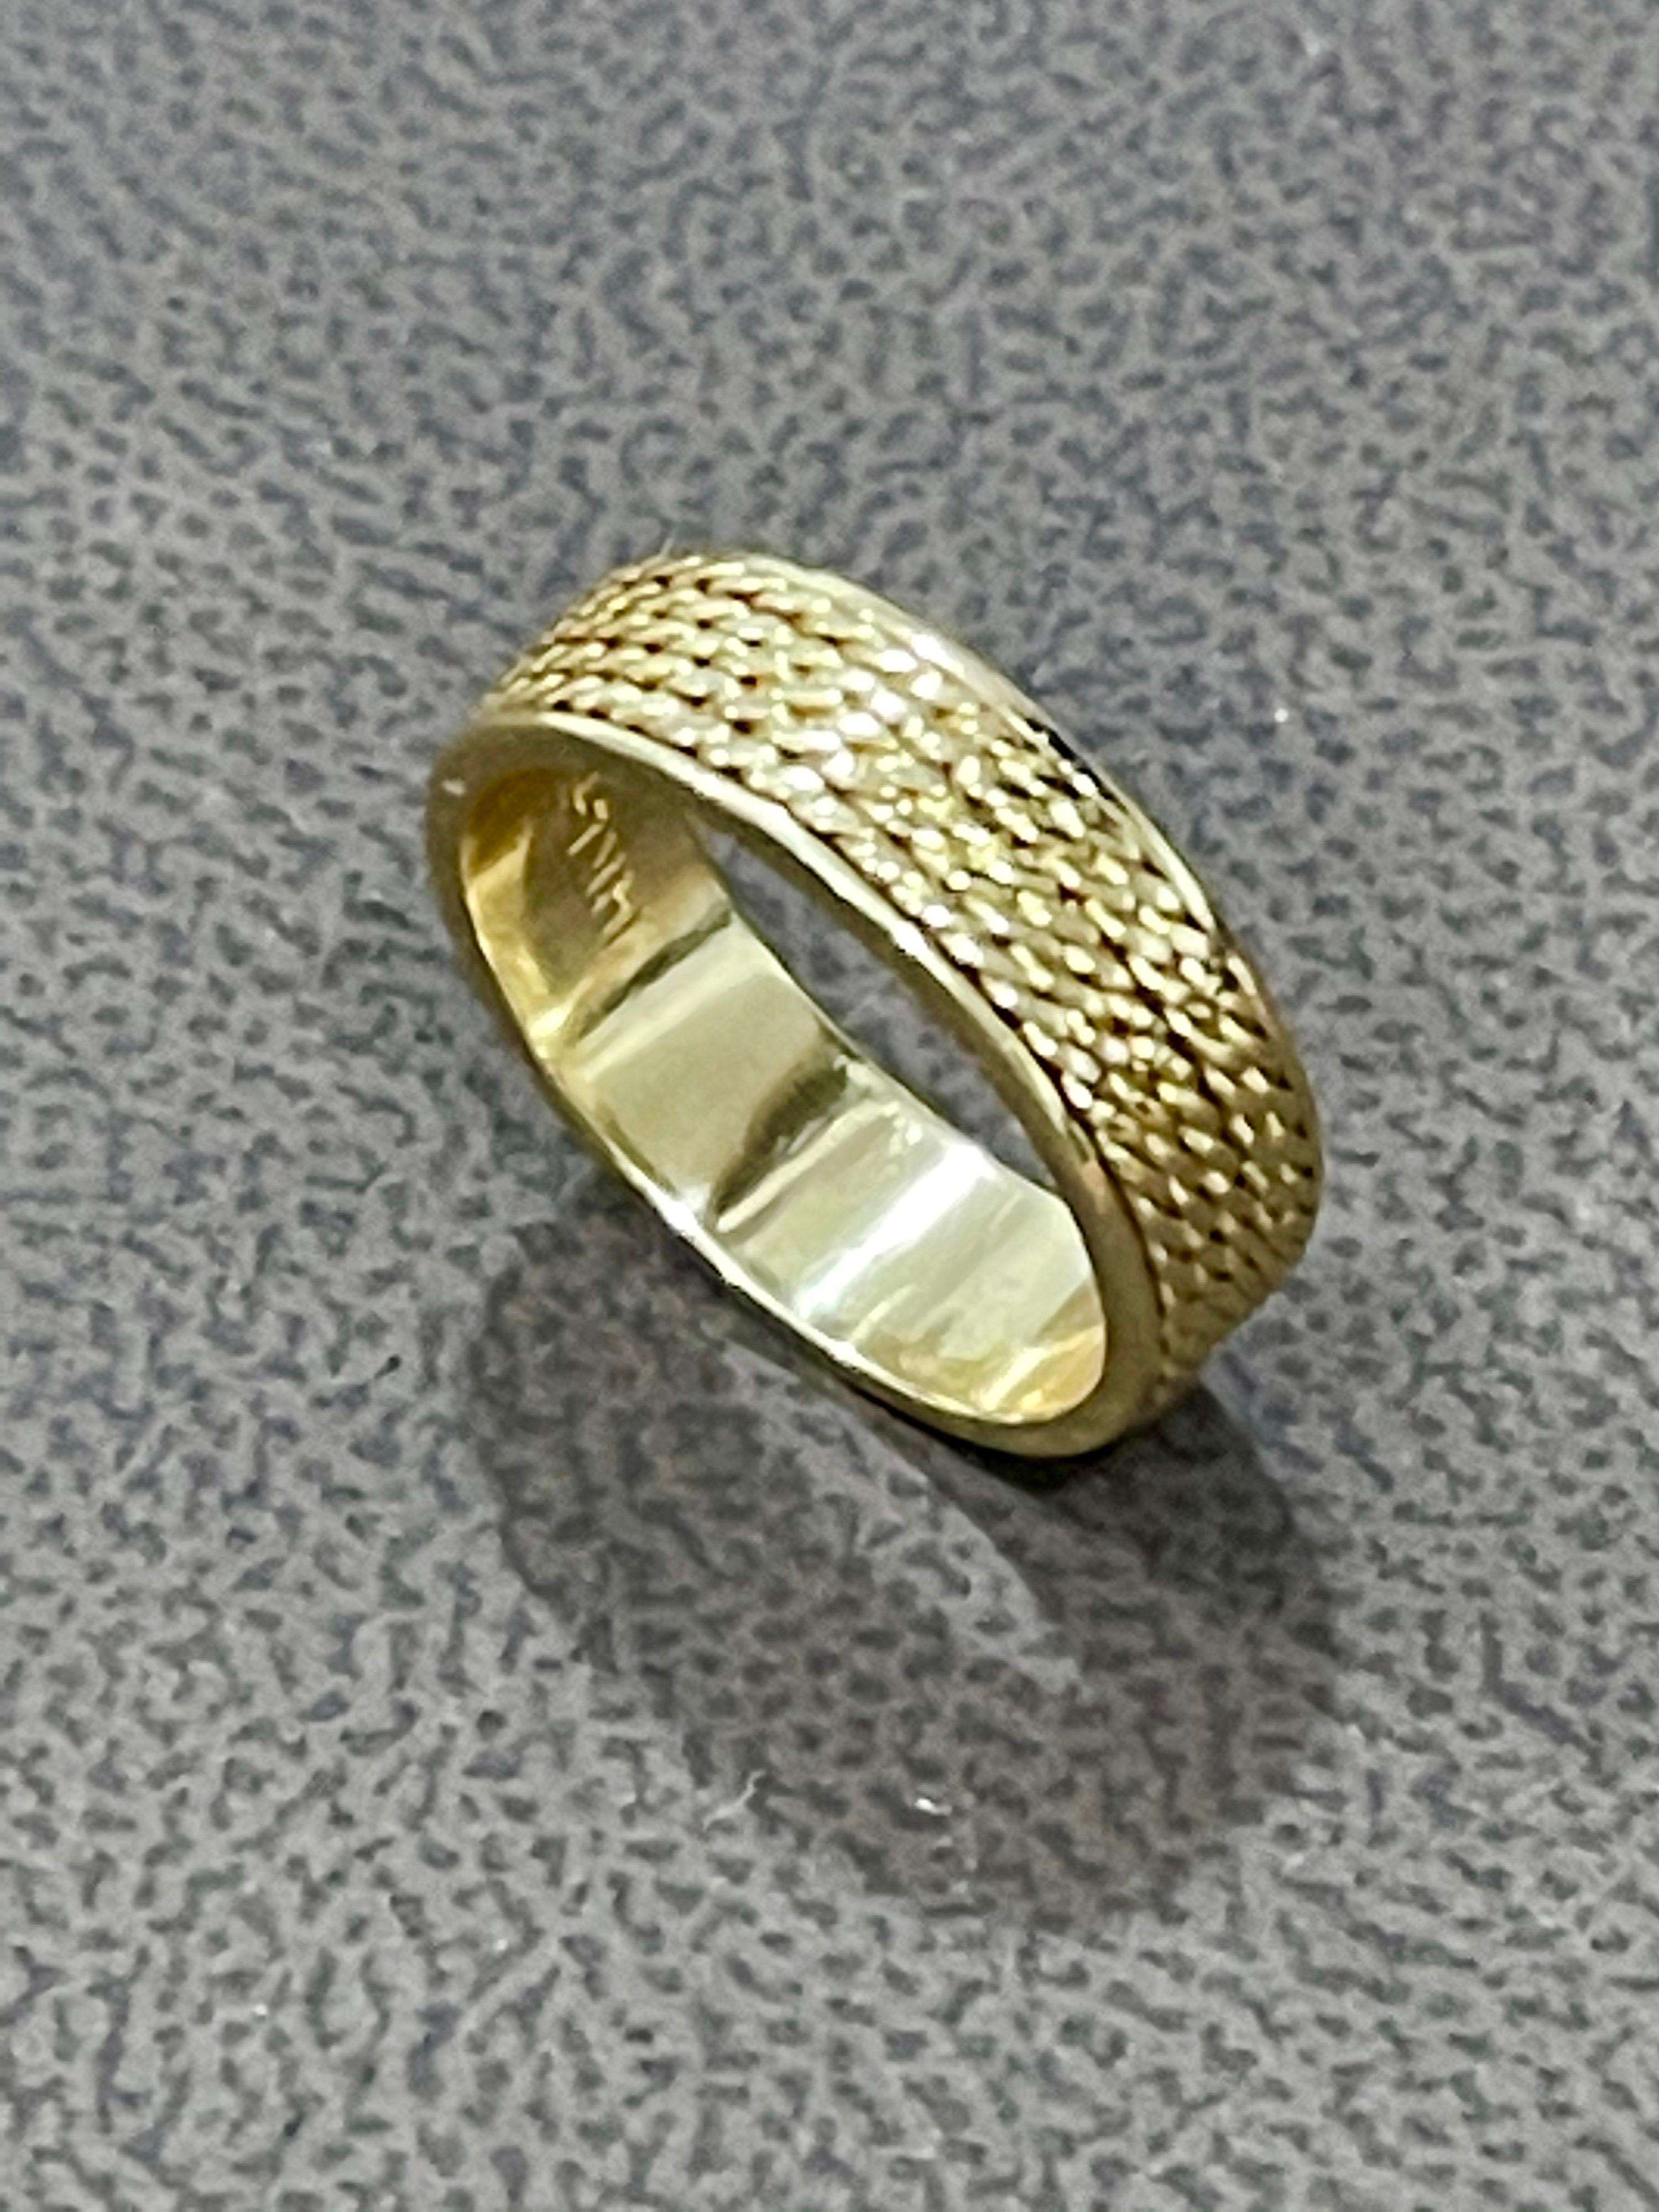 
14 Karat Yellow Gold  Classic Wide Wedding Band Ring Size 6, Unisex
This timeless style adds a Light classic Design on the middle of the  band.
Quality craftsmanship makes this long lasting band a great value. rounded inside edge for increased